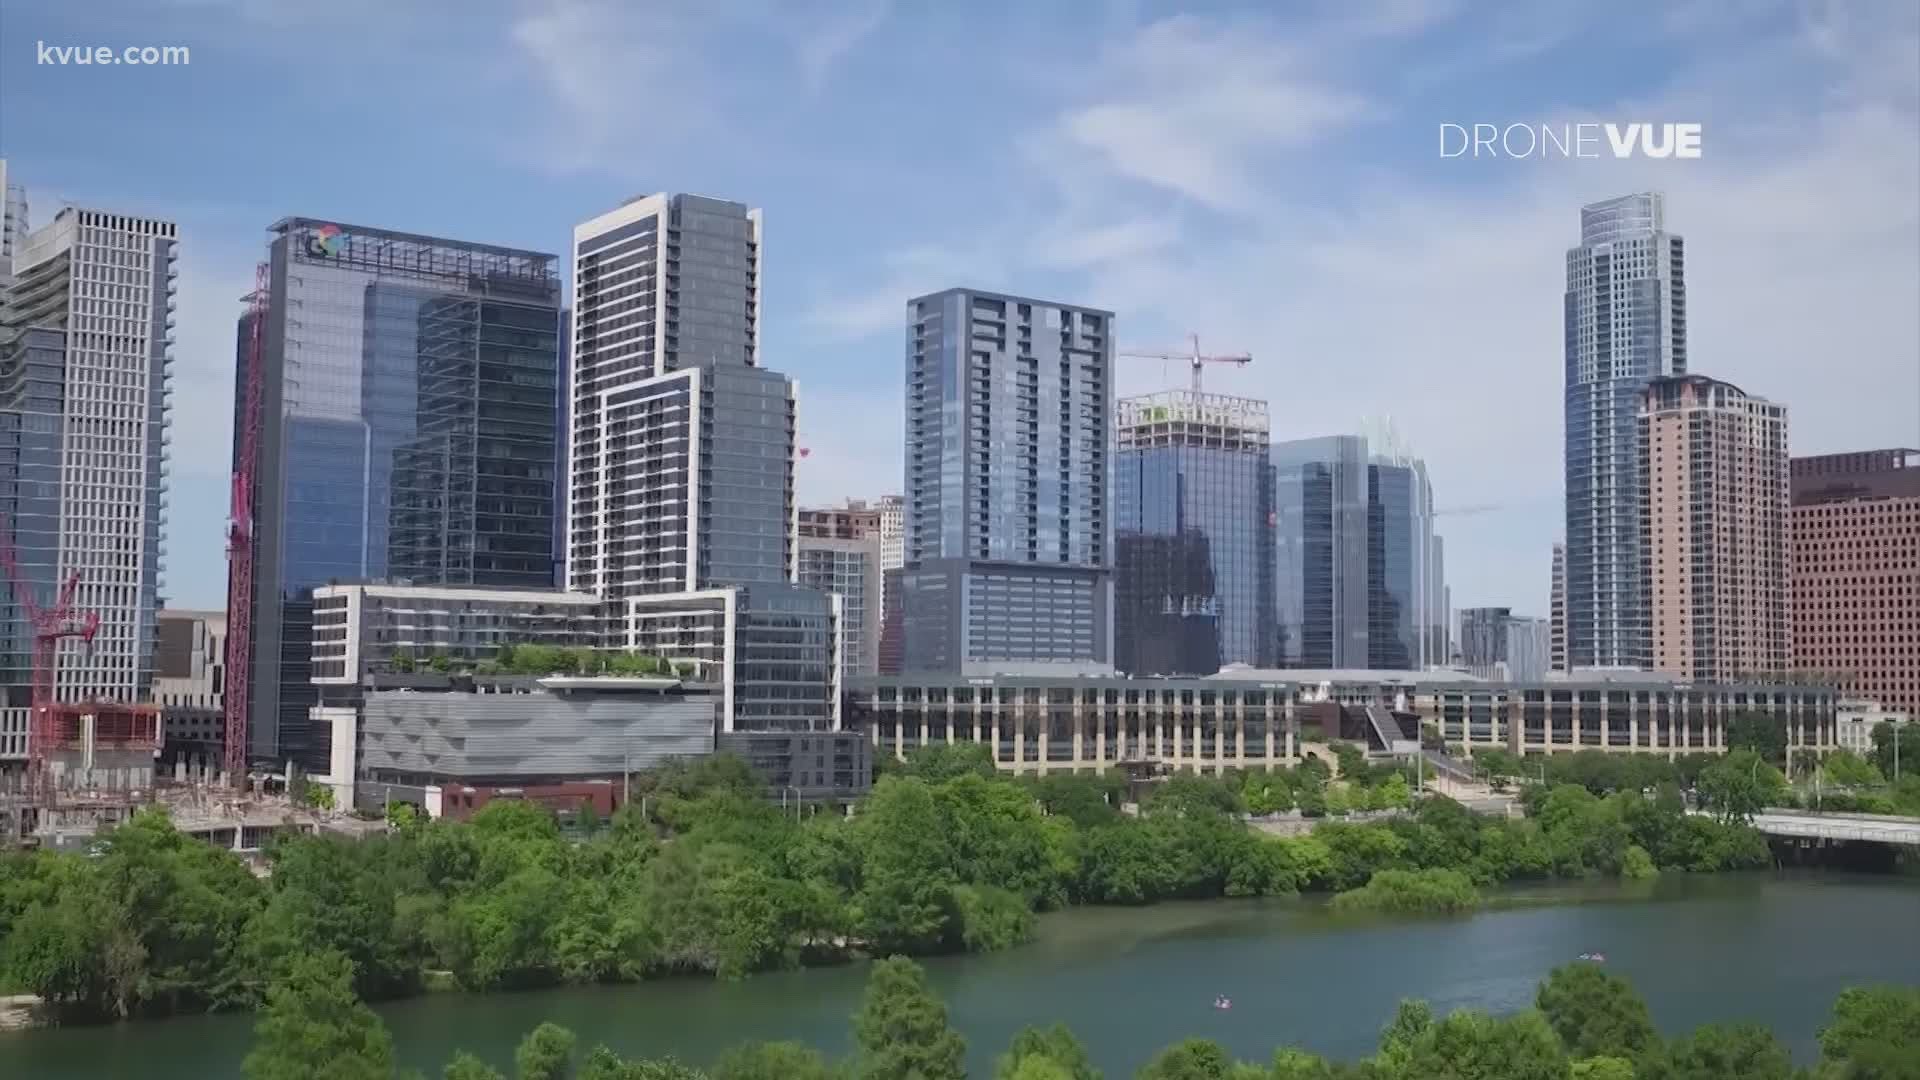 Austin's job growth hasn't slowed down since March. KVUE's Luis de Leon explains how, in a way, the coronavirus may have helped the city's economy.